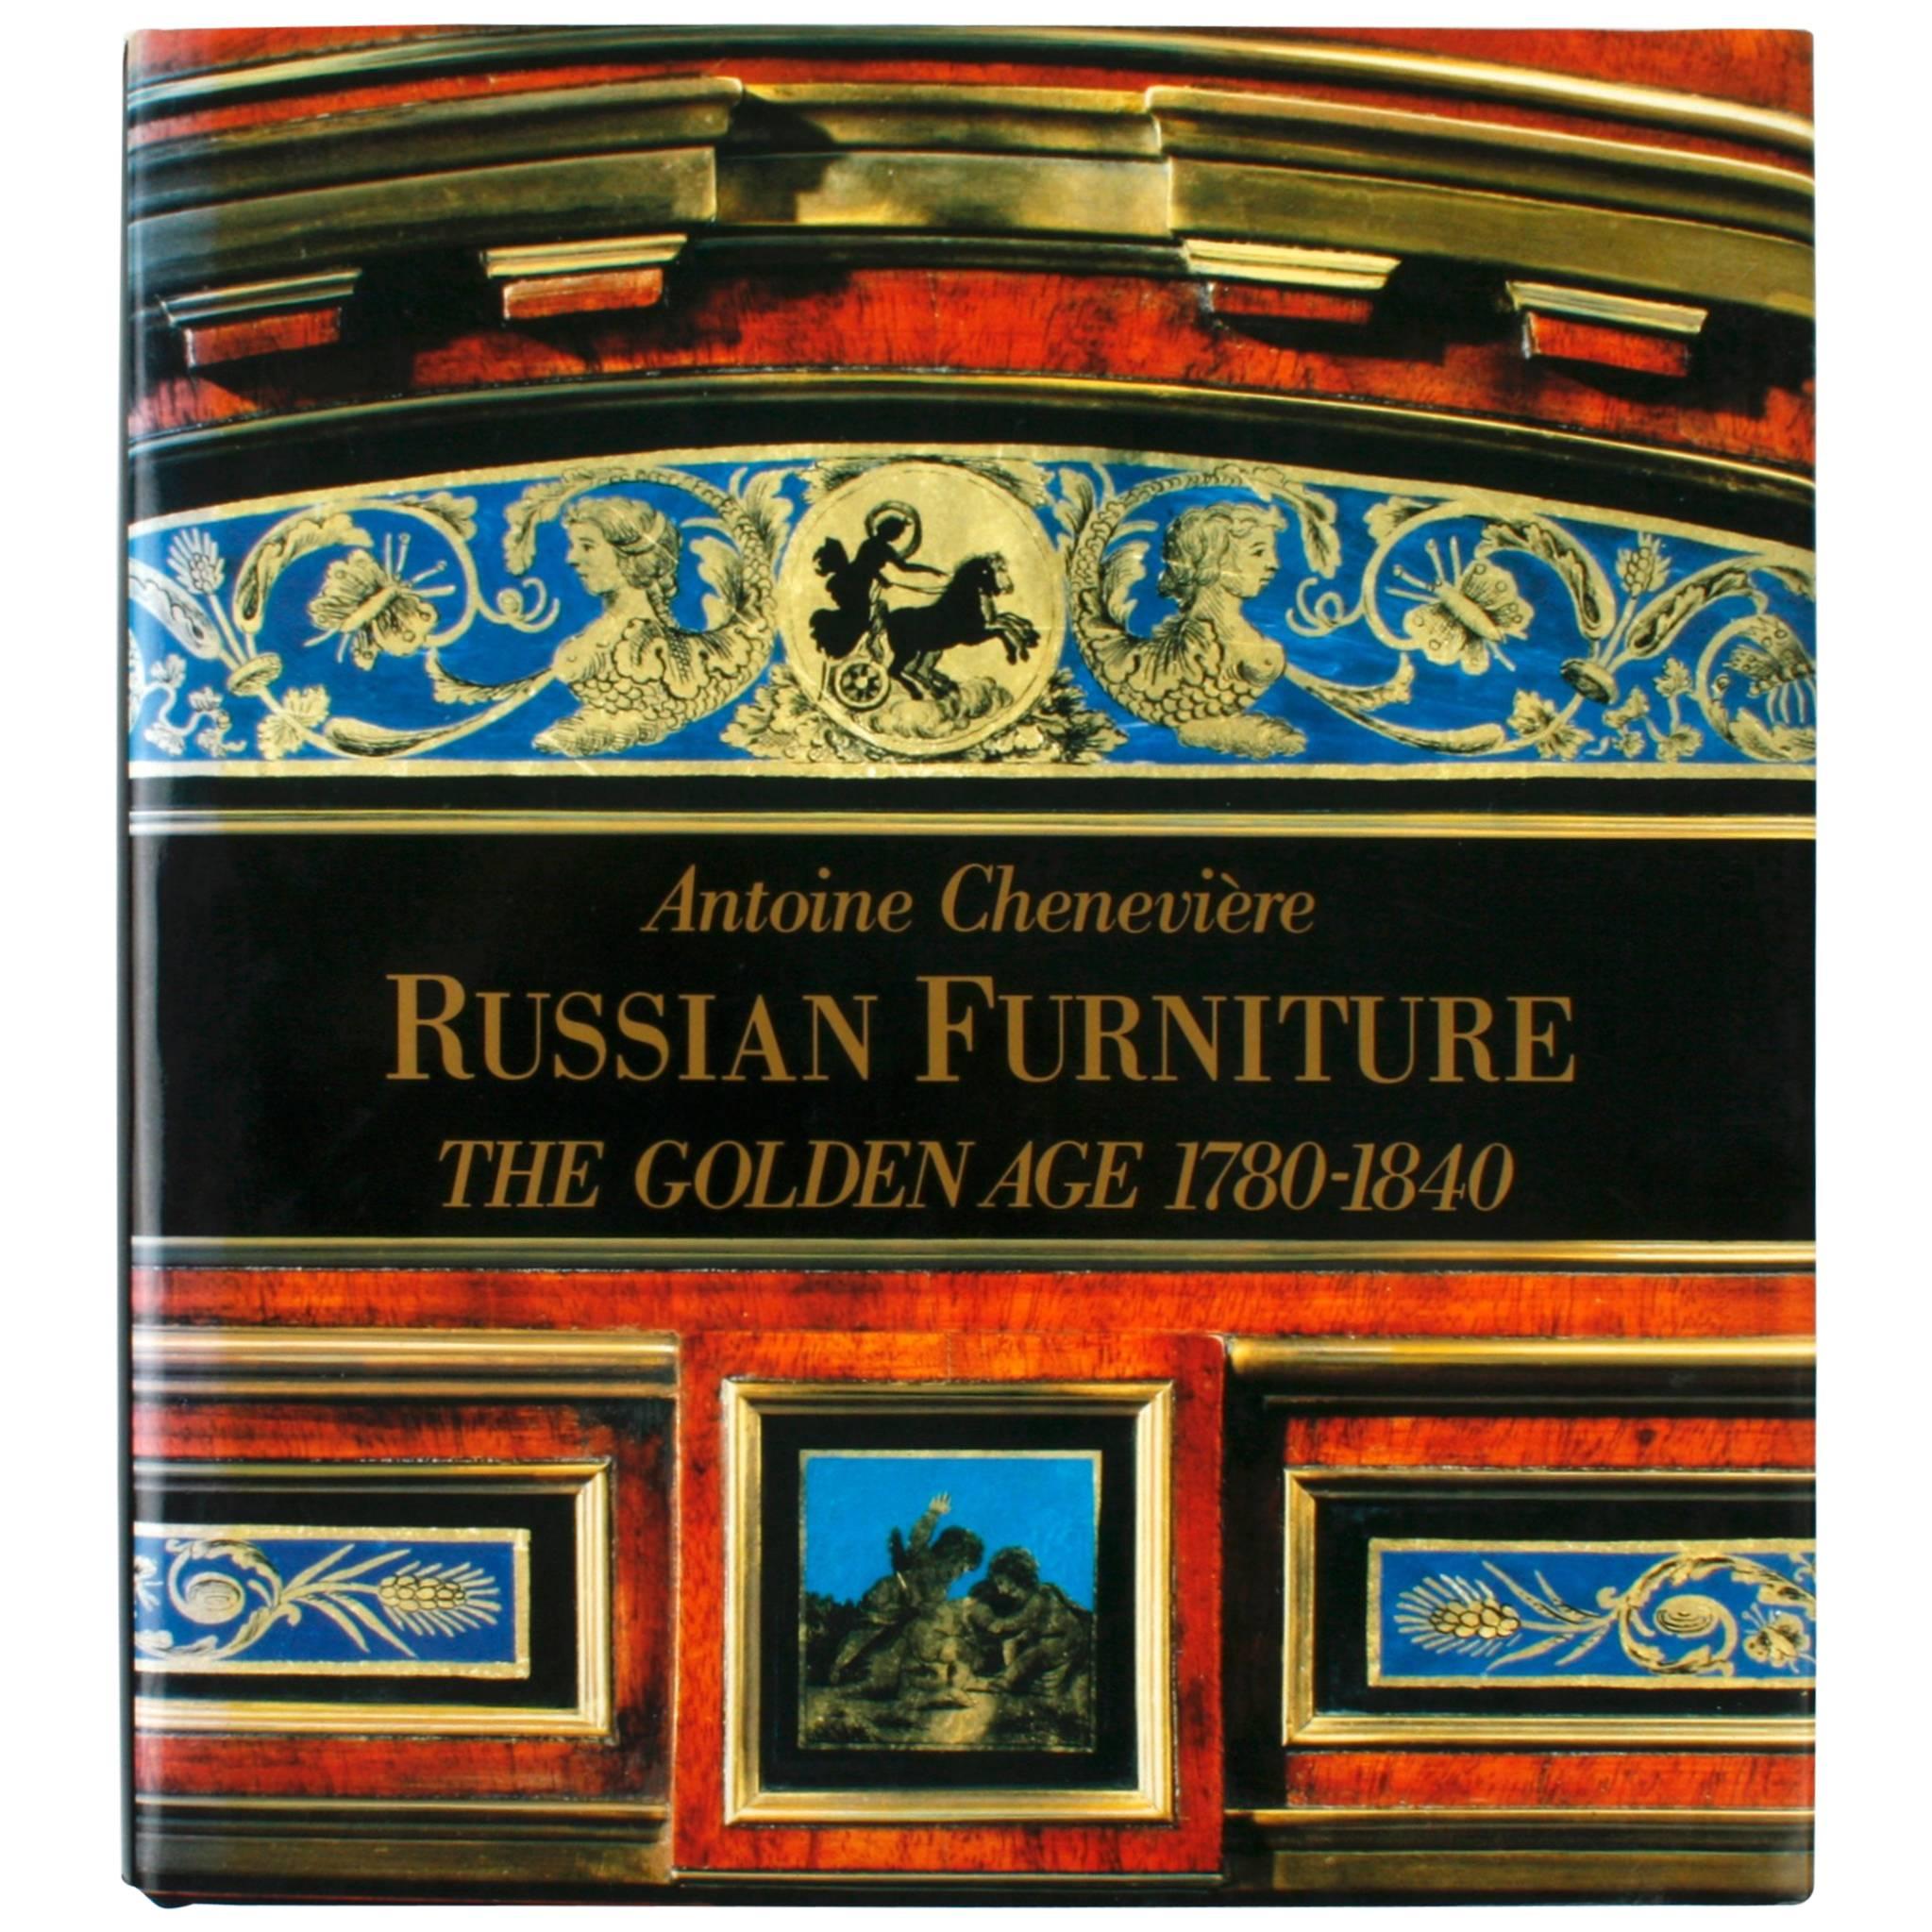 Russian Furniture, the Golden Age 1780-1840 1st Ed by Antoine Chenevière